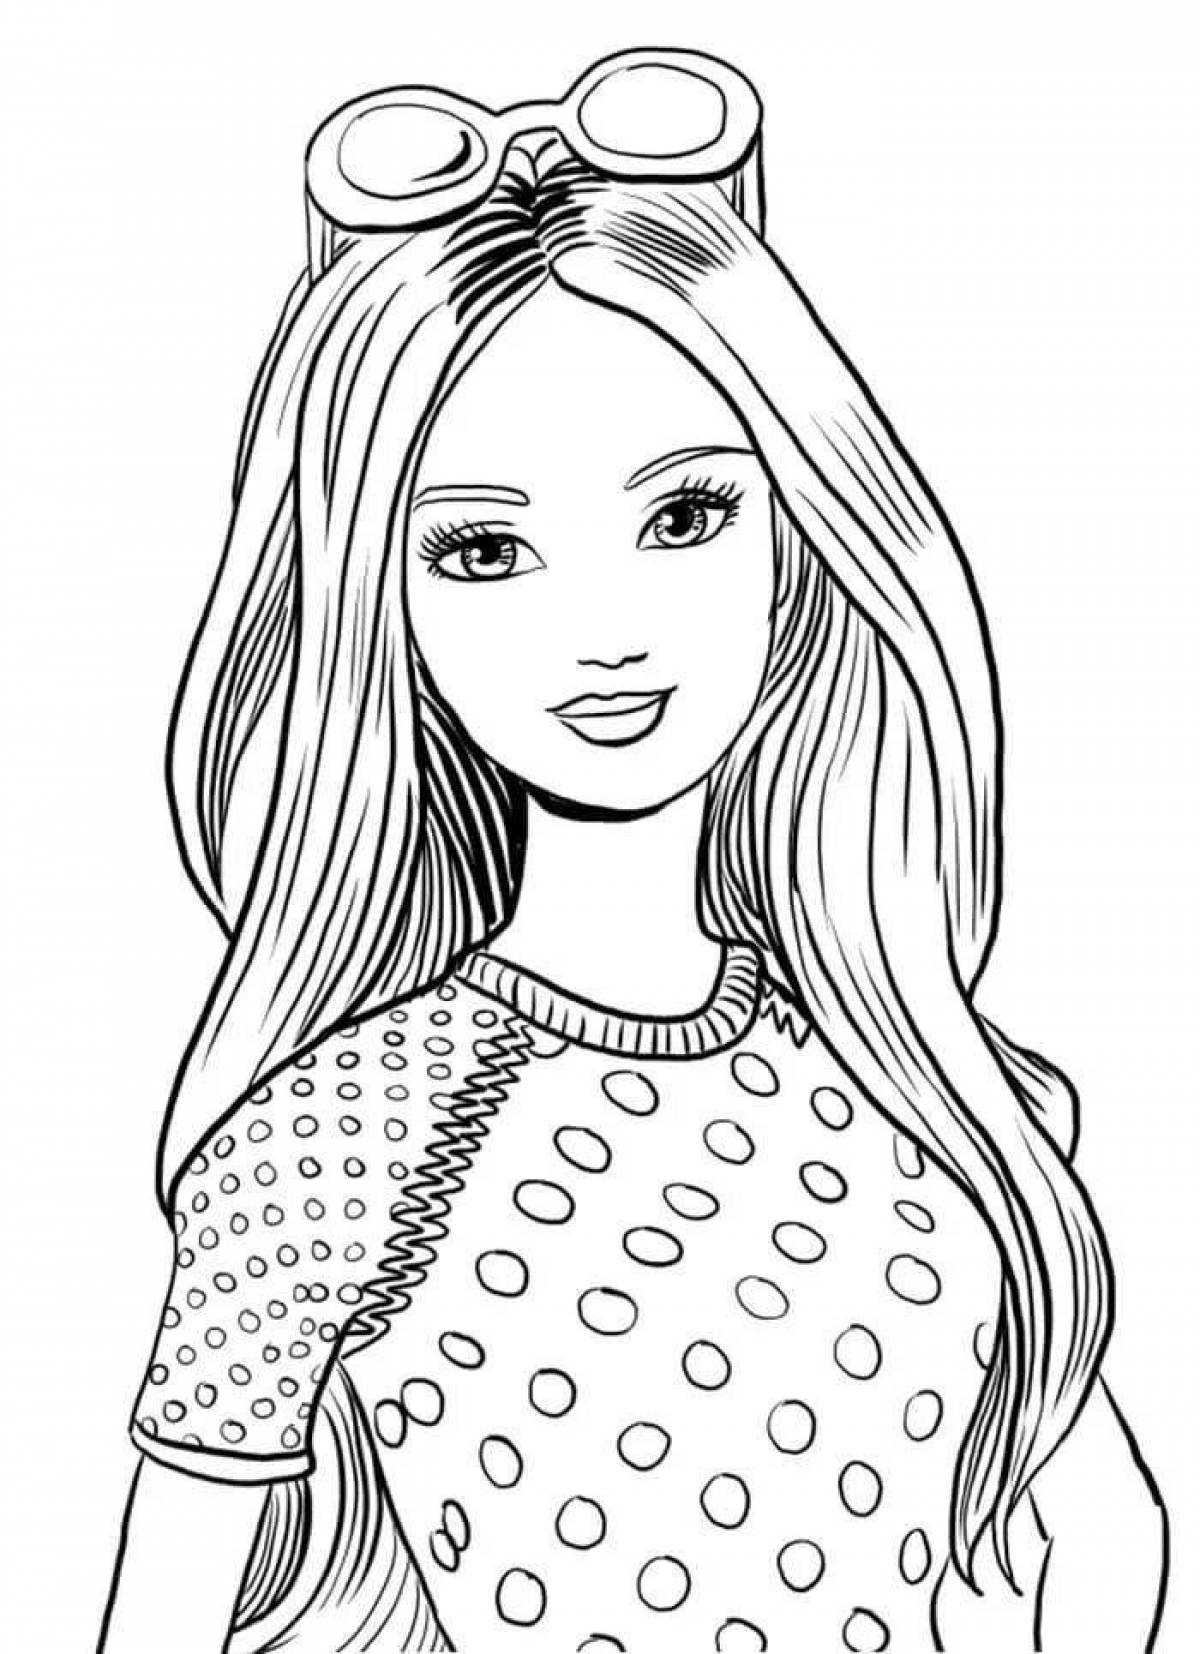 Coloring pages for girls 13-14 years old